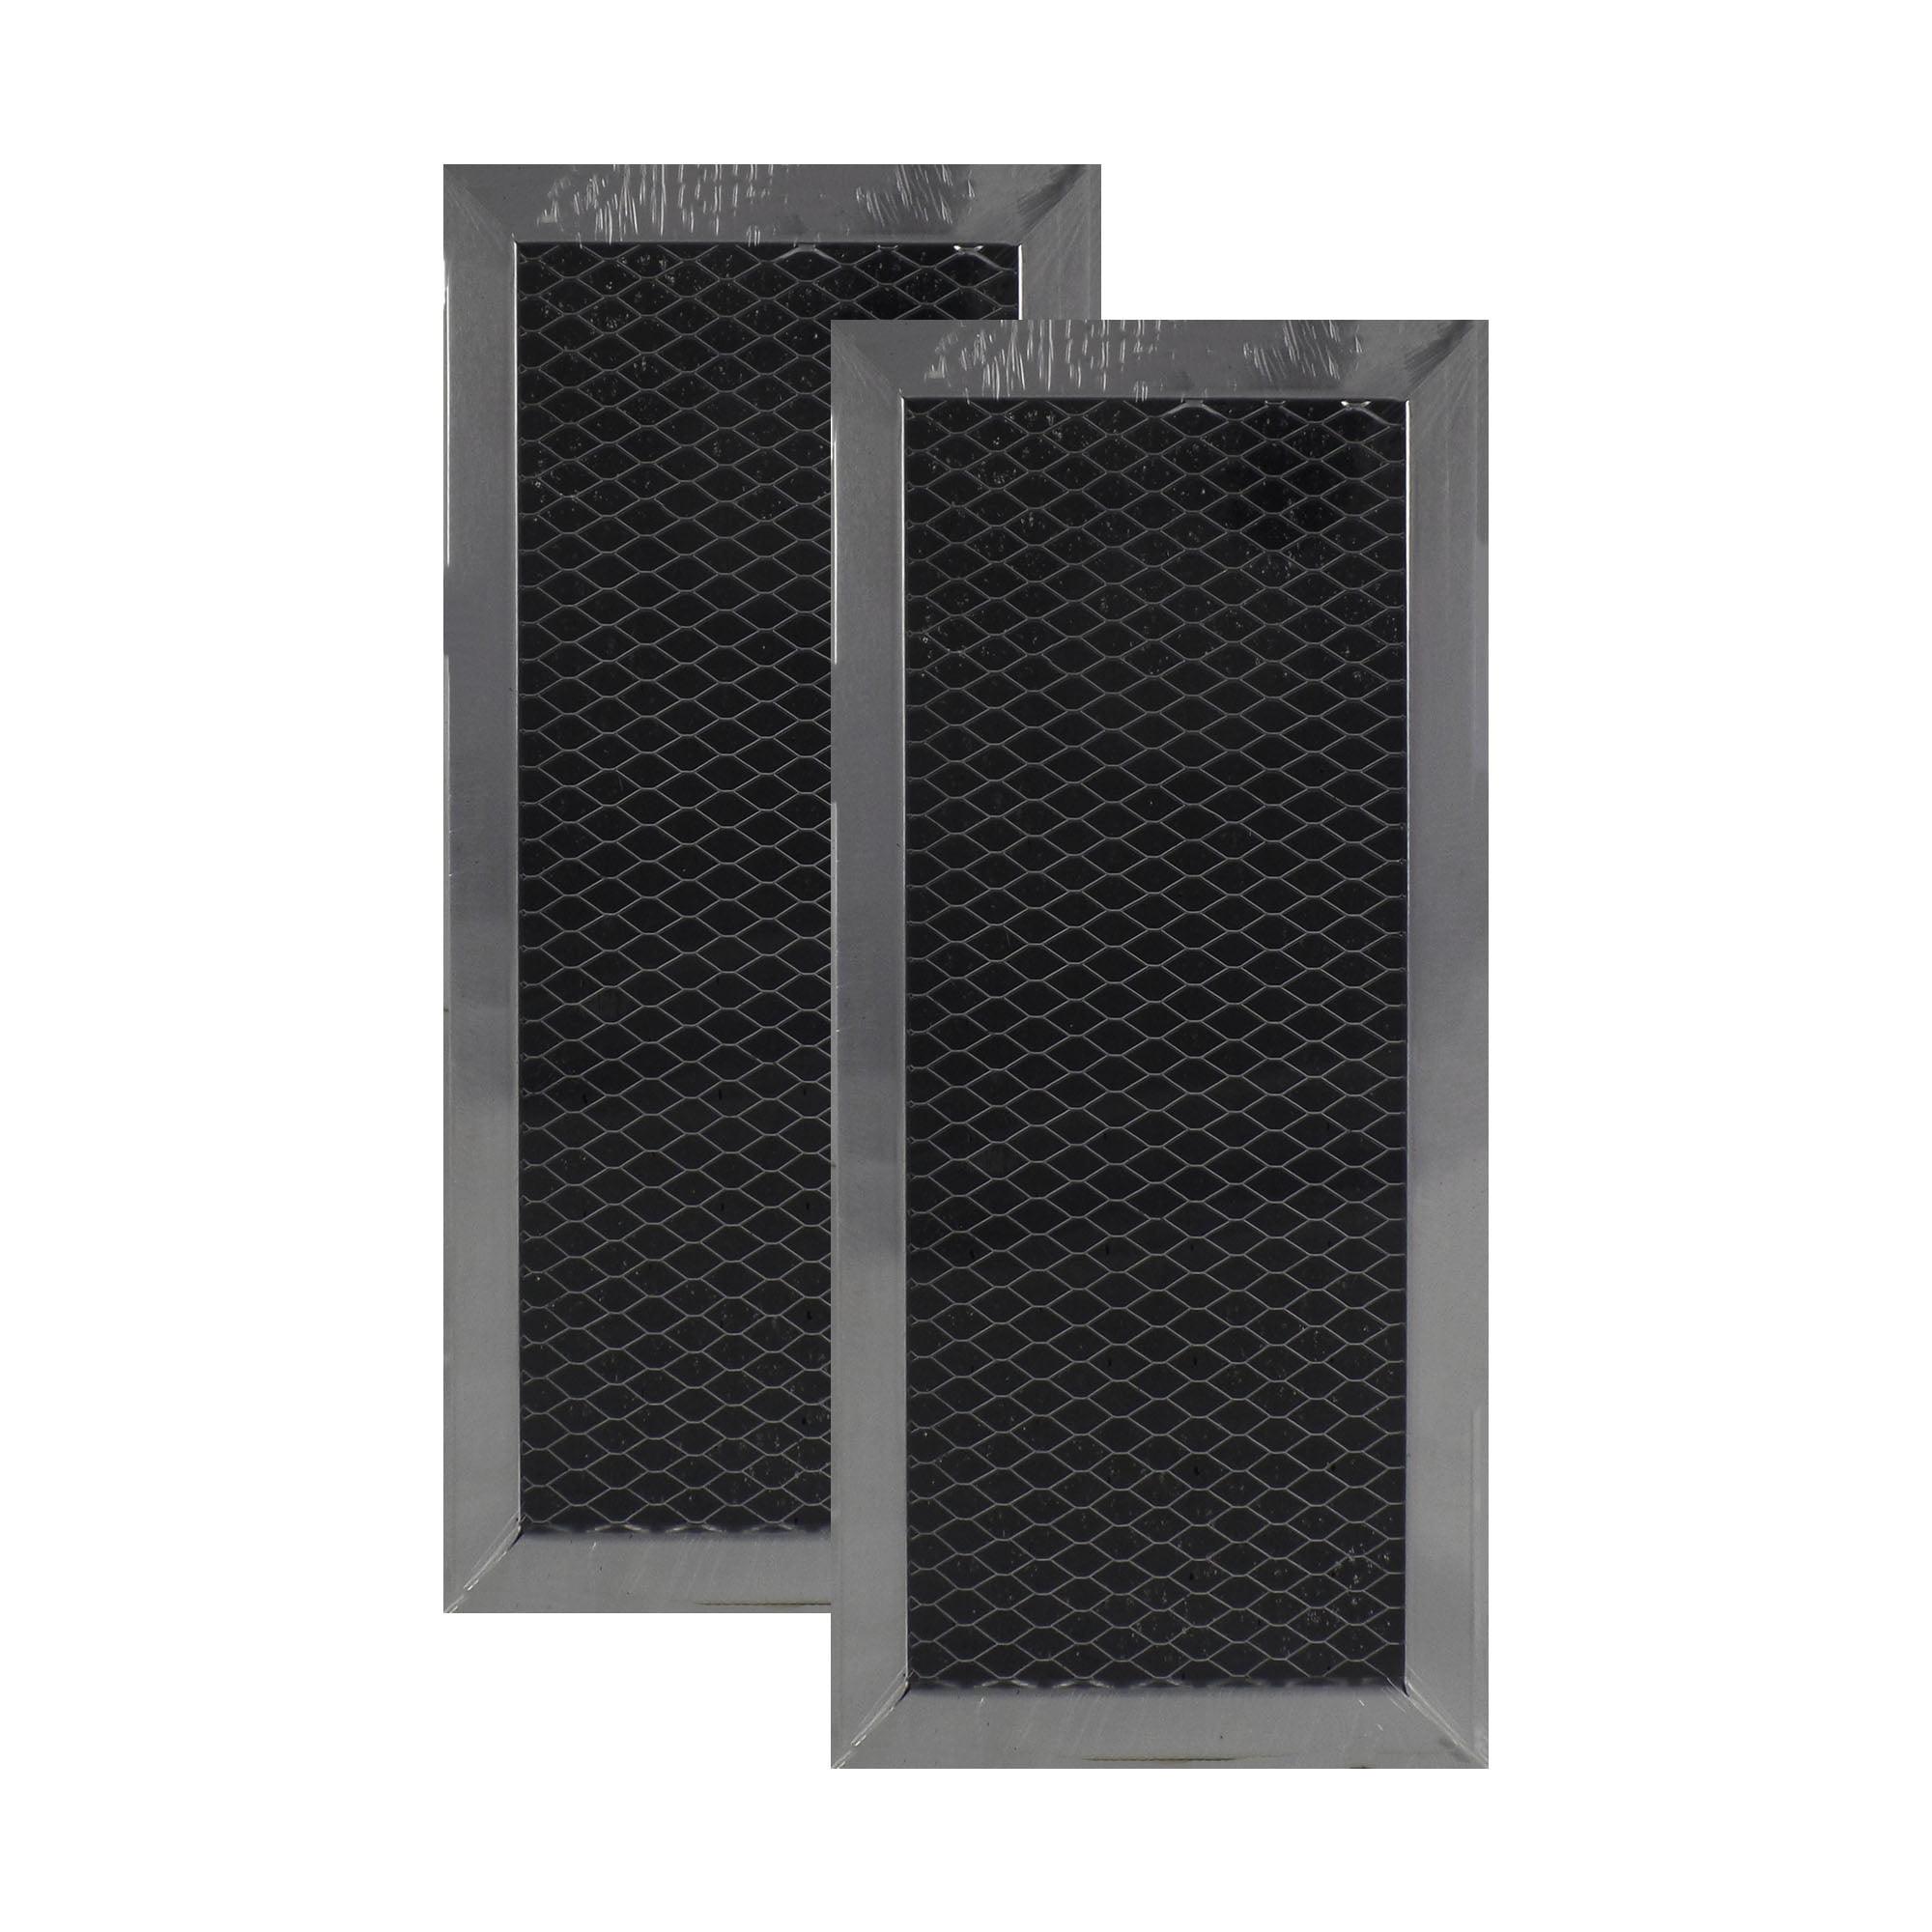 2-Pack Air Filter Factory AP4221321 Compatible for Samsung Charcoal